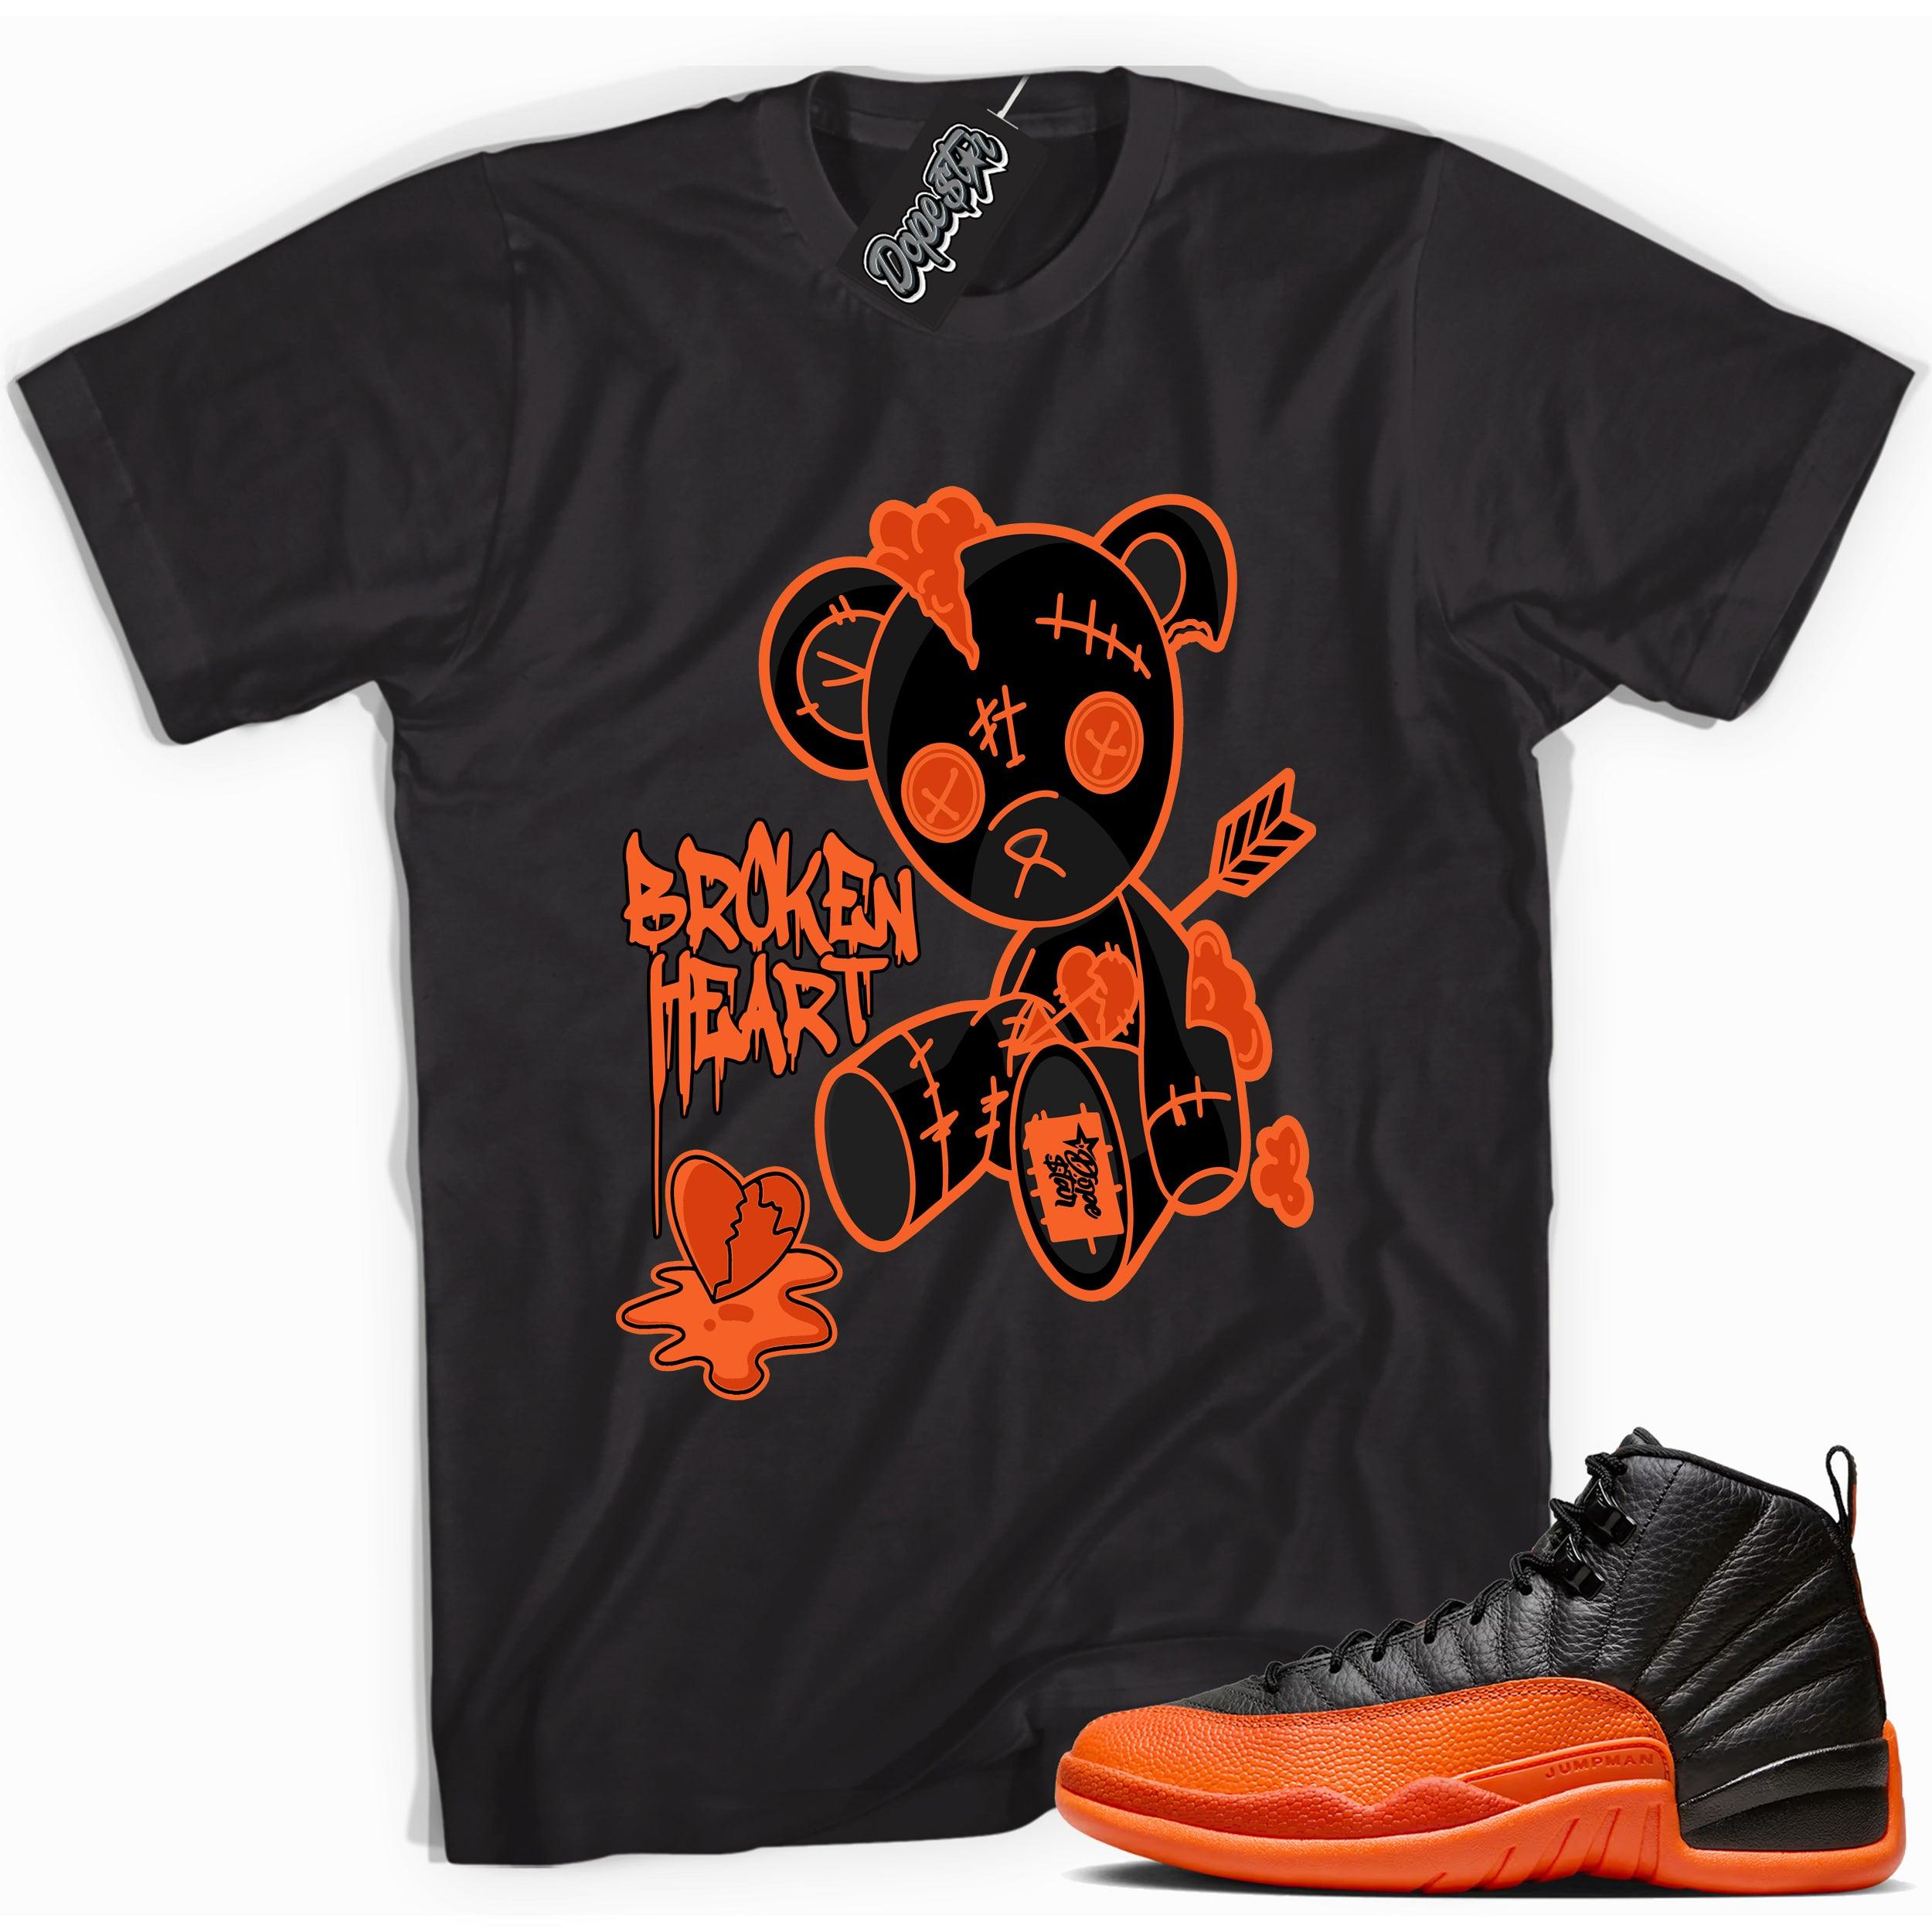 Cool Black graphic tee with “ Broken Heart Bear ” print, that perfectly matches Air Jordan 12 Retro WNBA All-Star Brilliant Orange sneakers 